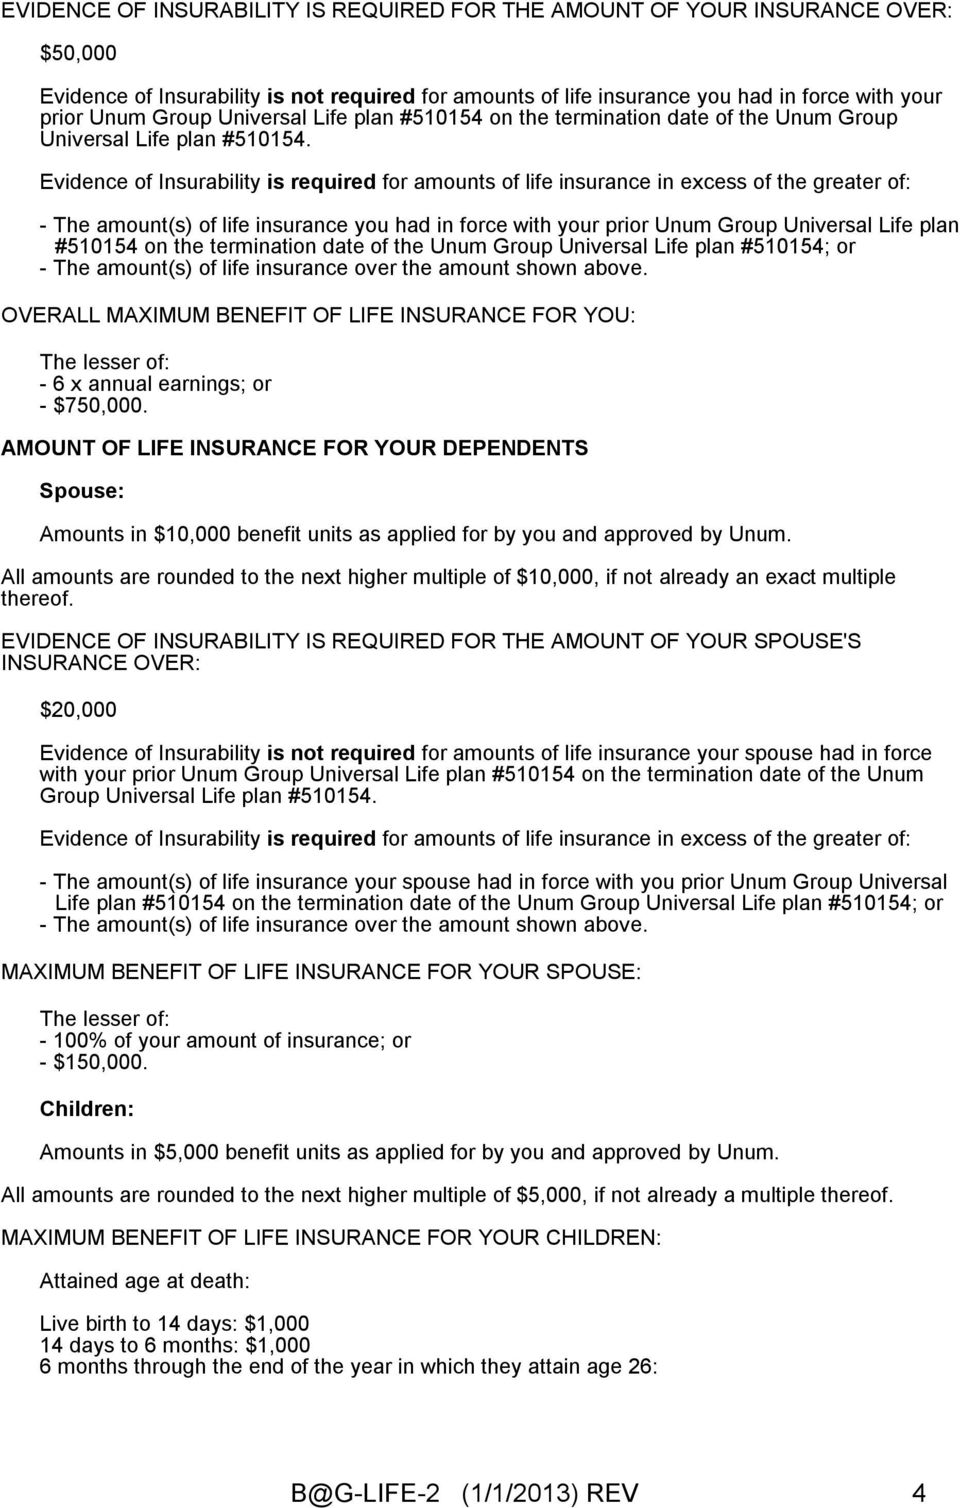 Evidence of Insurability is required for amounts of life insurance in excess of the greater of: - The amount(s) of life insurance you had in force with your prior Unum Group Universal Life plan